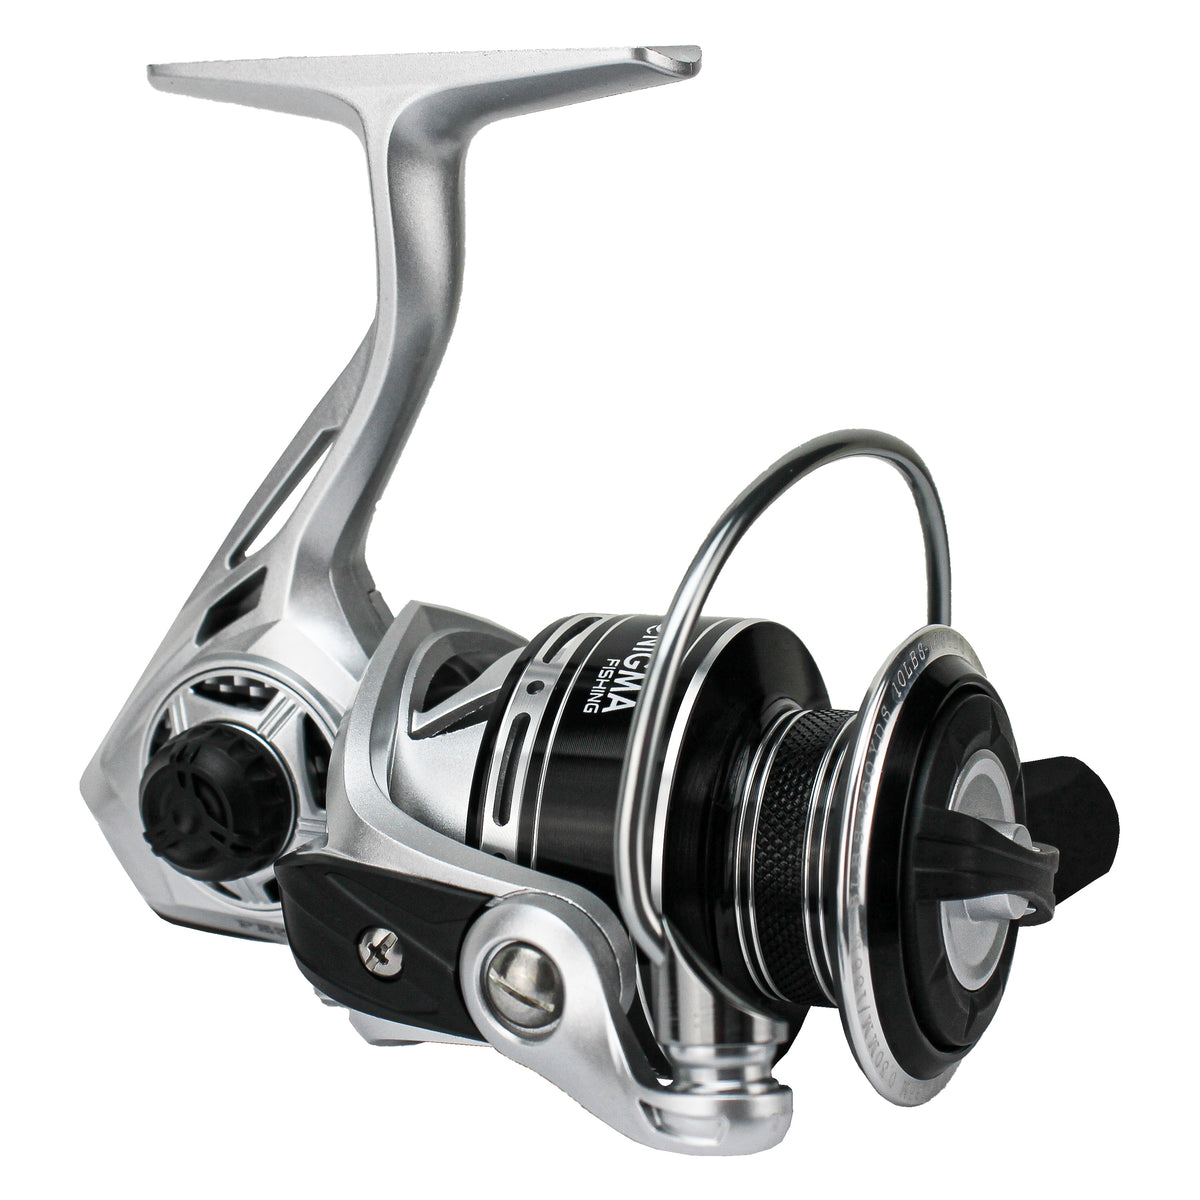  Ashconfish Spinning Fishing Reel, Graphite Body, 7+1  Stainless Steel BB, 50:1 Gear Ratio, Lightweight Spinning Reel For  Freshwater Fishing, Come